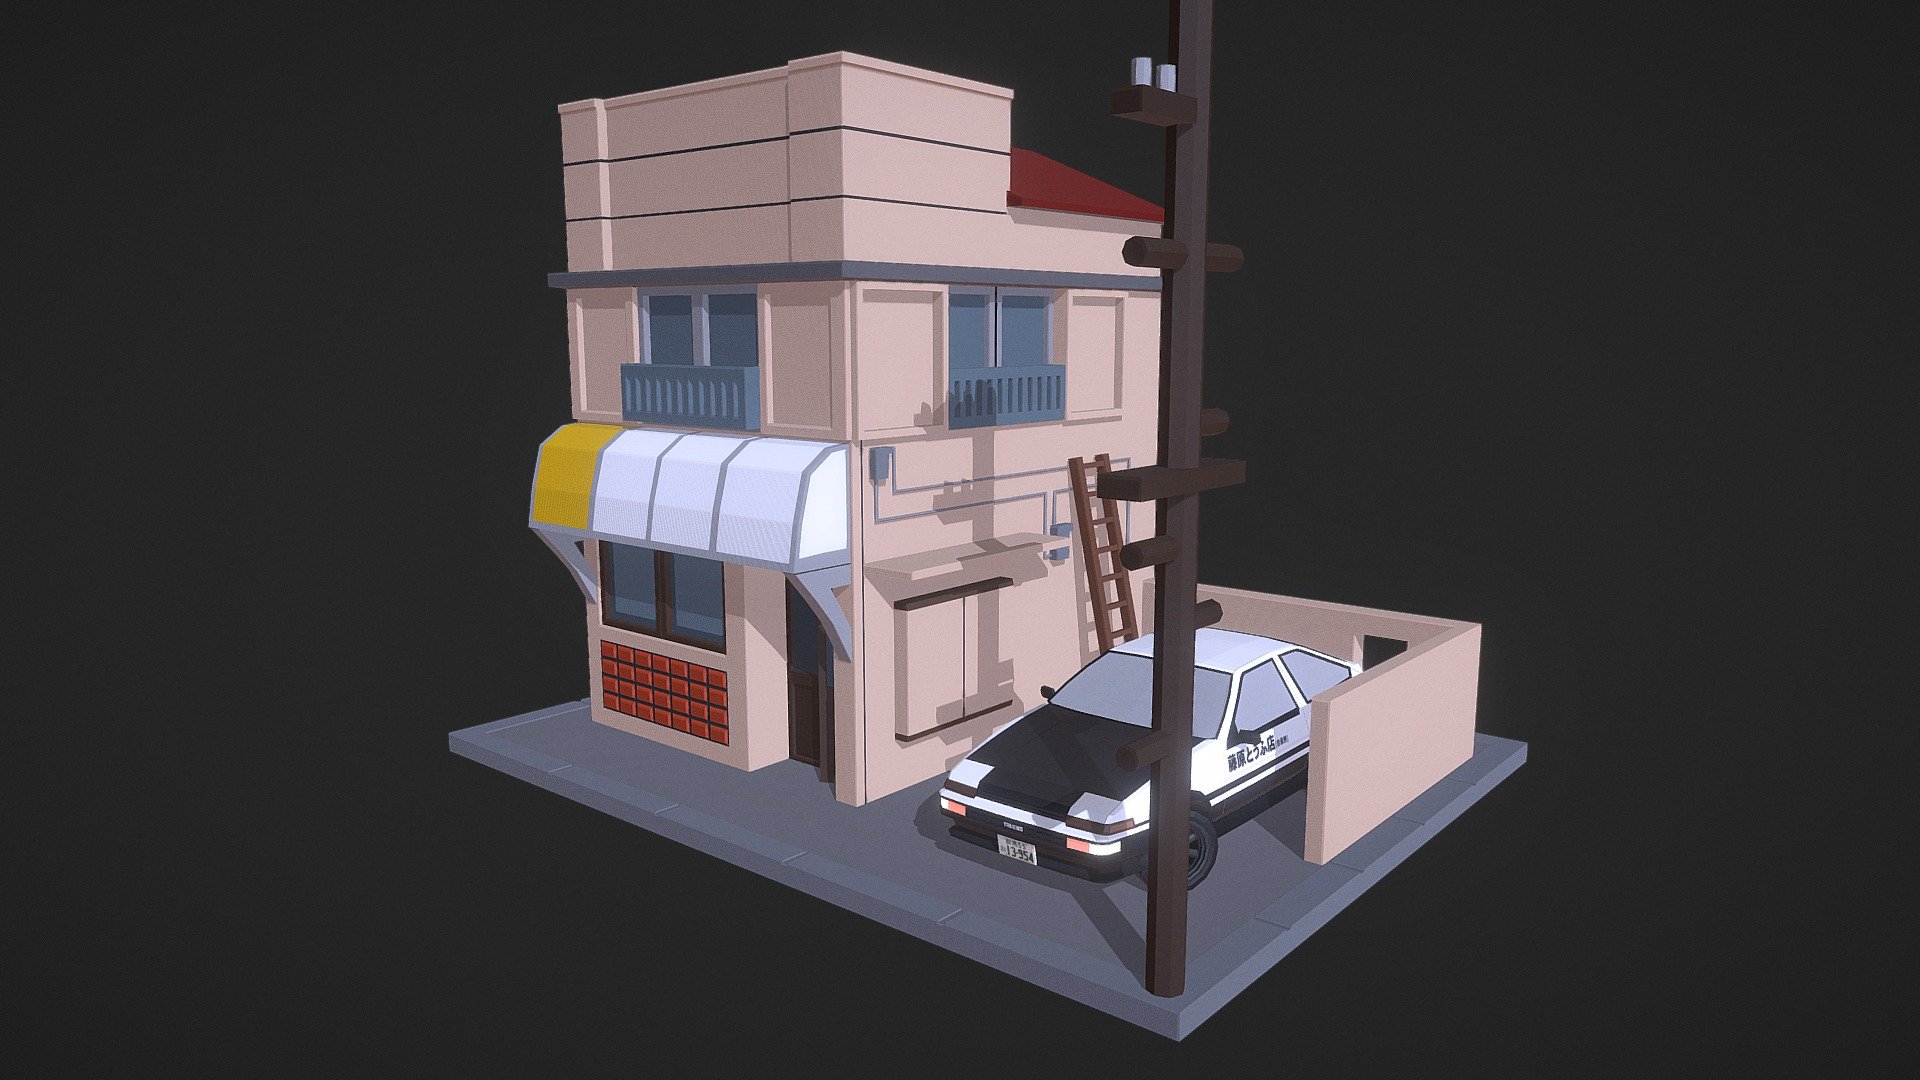 Hi everyone! 
I wanted to represent one of my favorite place, the Tofu shop.
Enjoy and check all the details in the scene 3d model